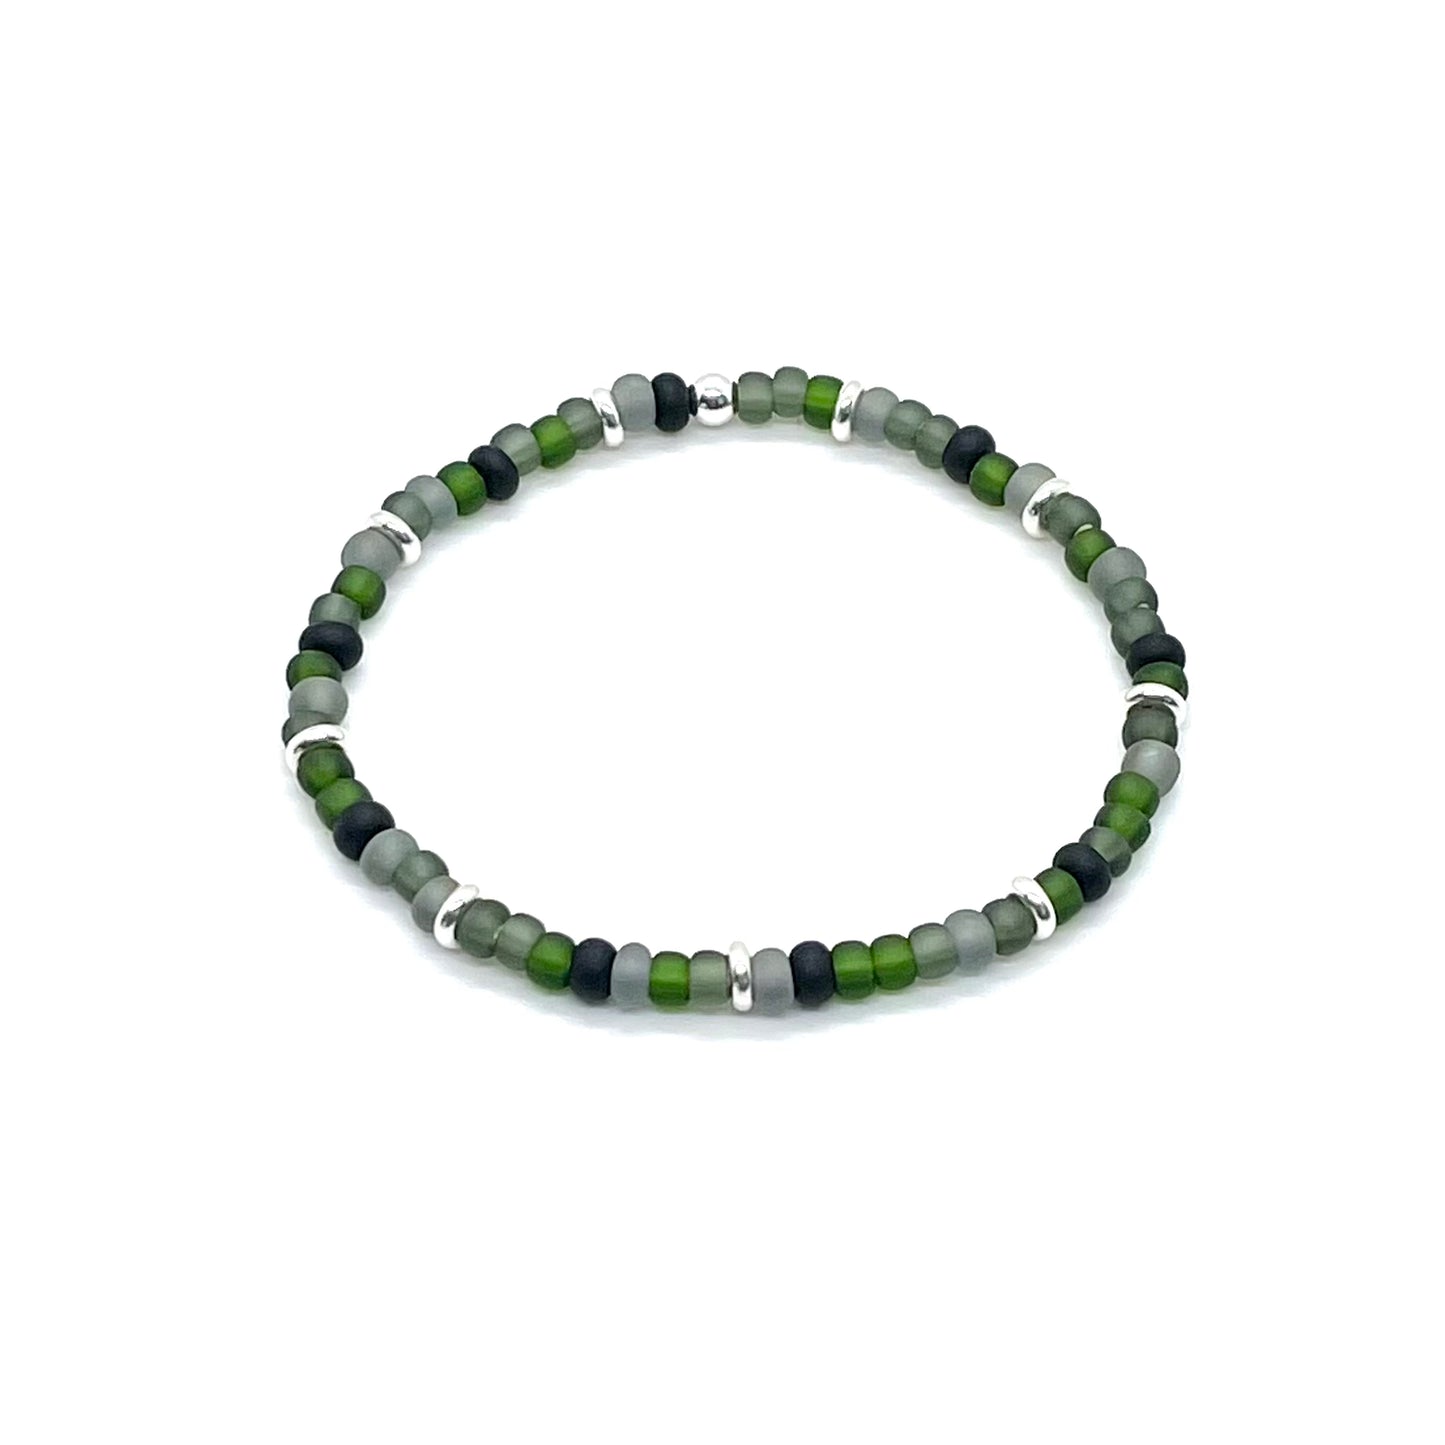 Beaded men's bracelet with matte green, gray, and black seed beads and silver-plated accent disks on elastic stretch cord.